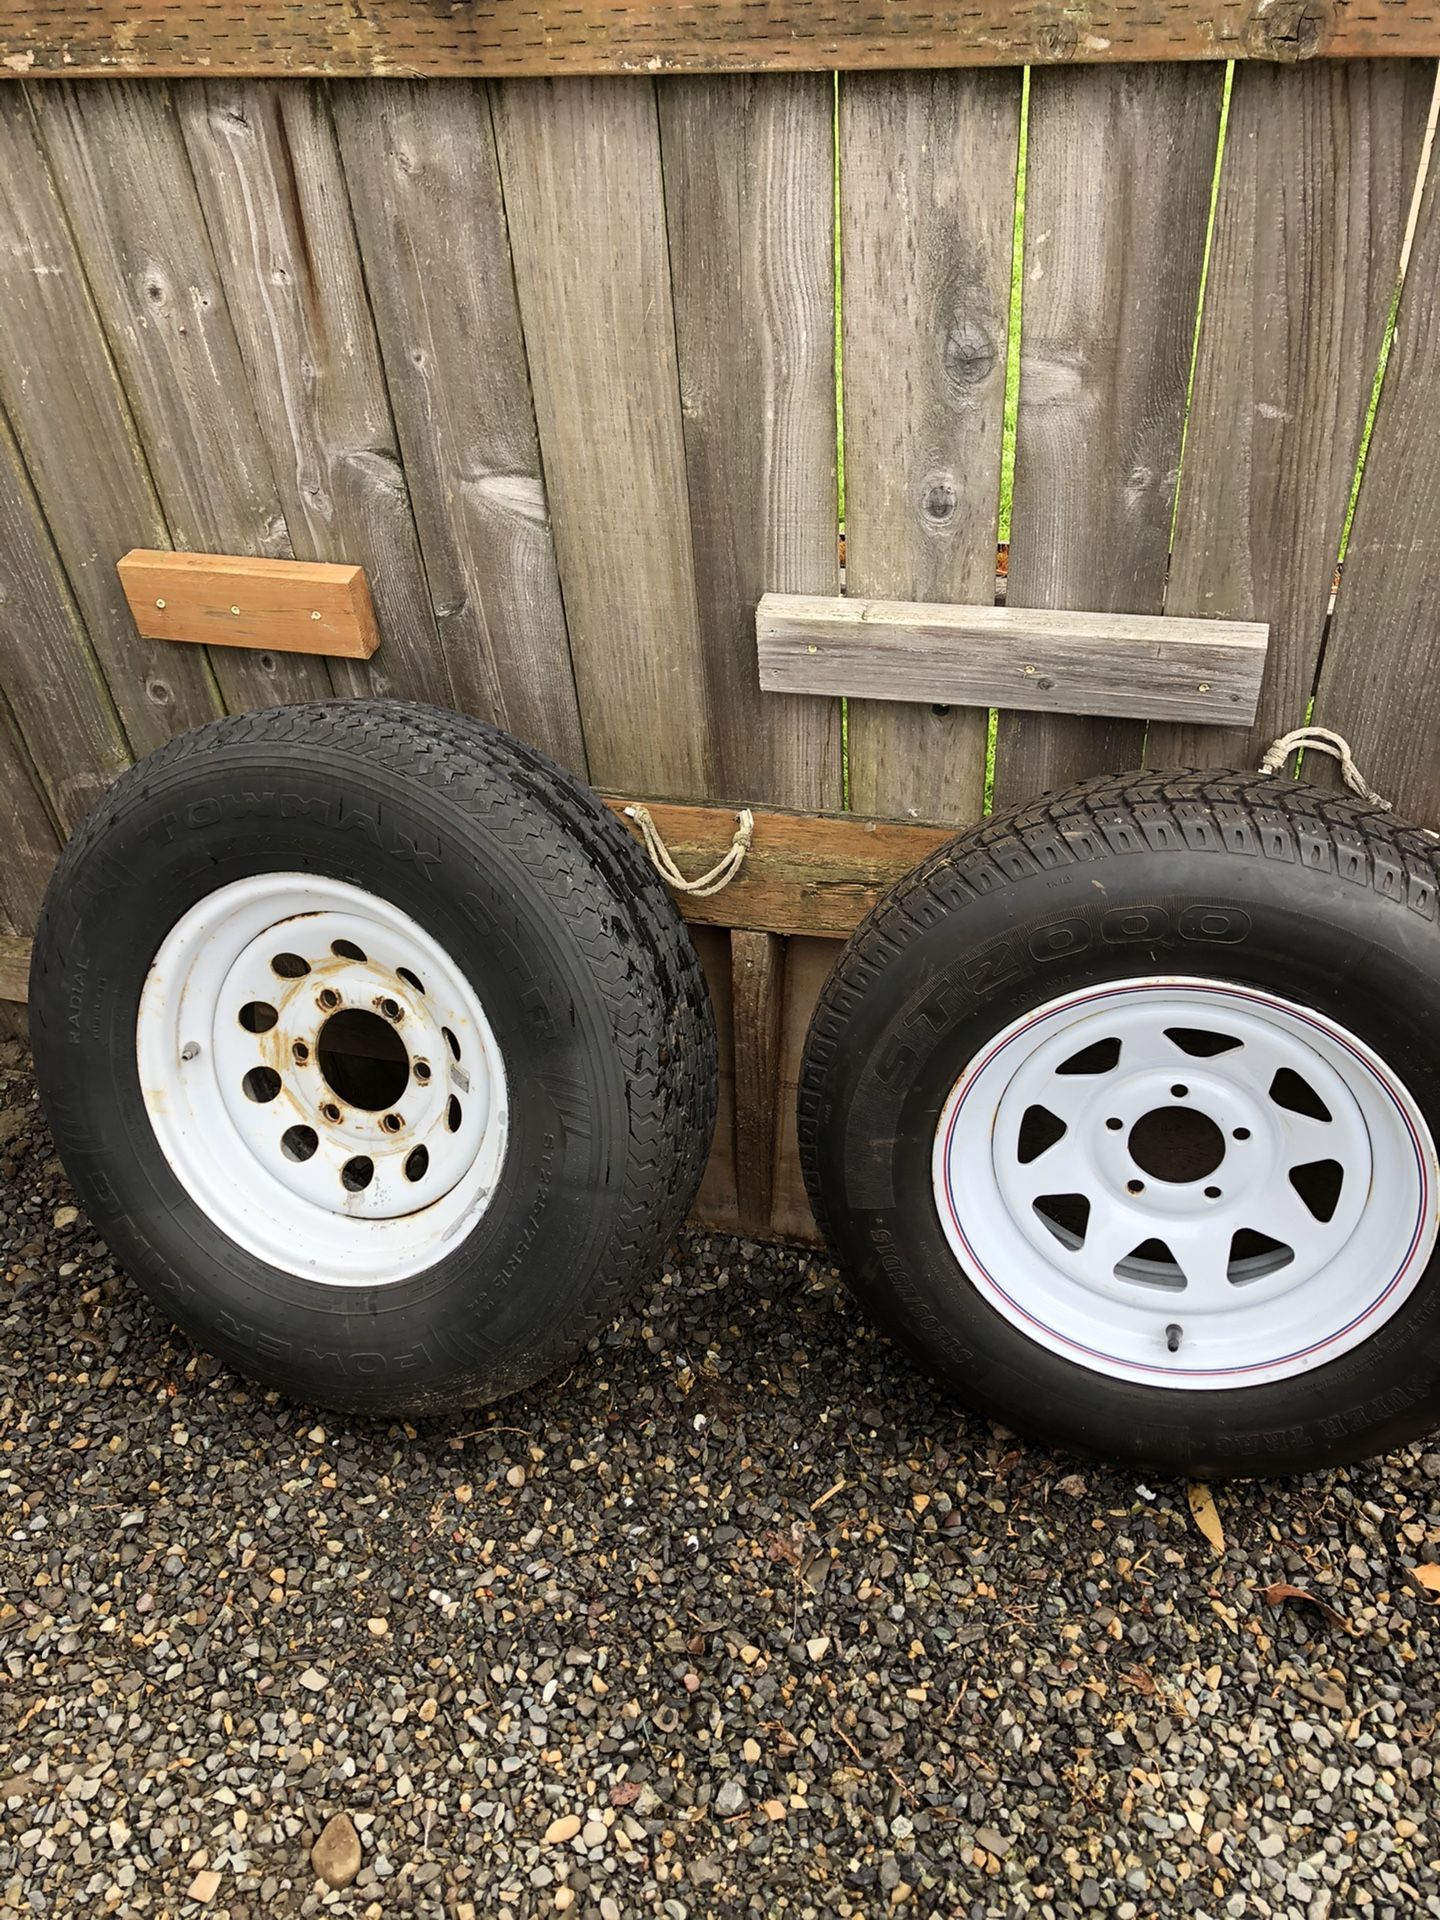 Trailer spare tires. (Nearly new)